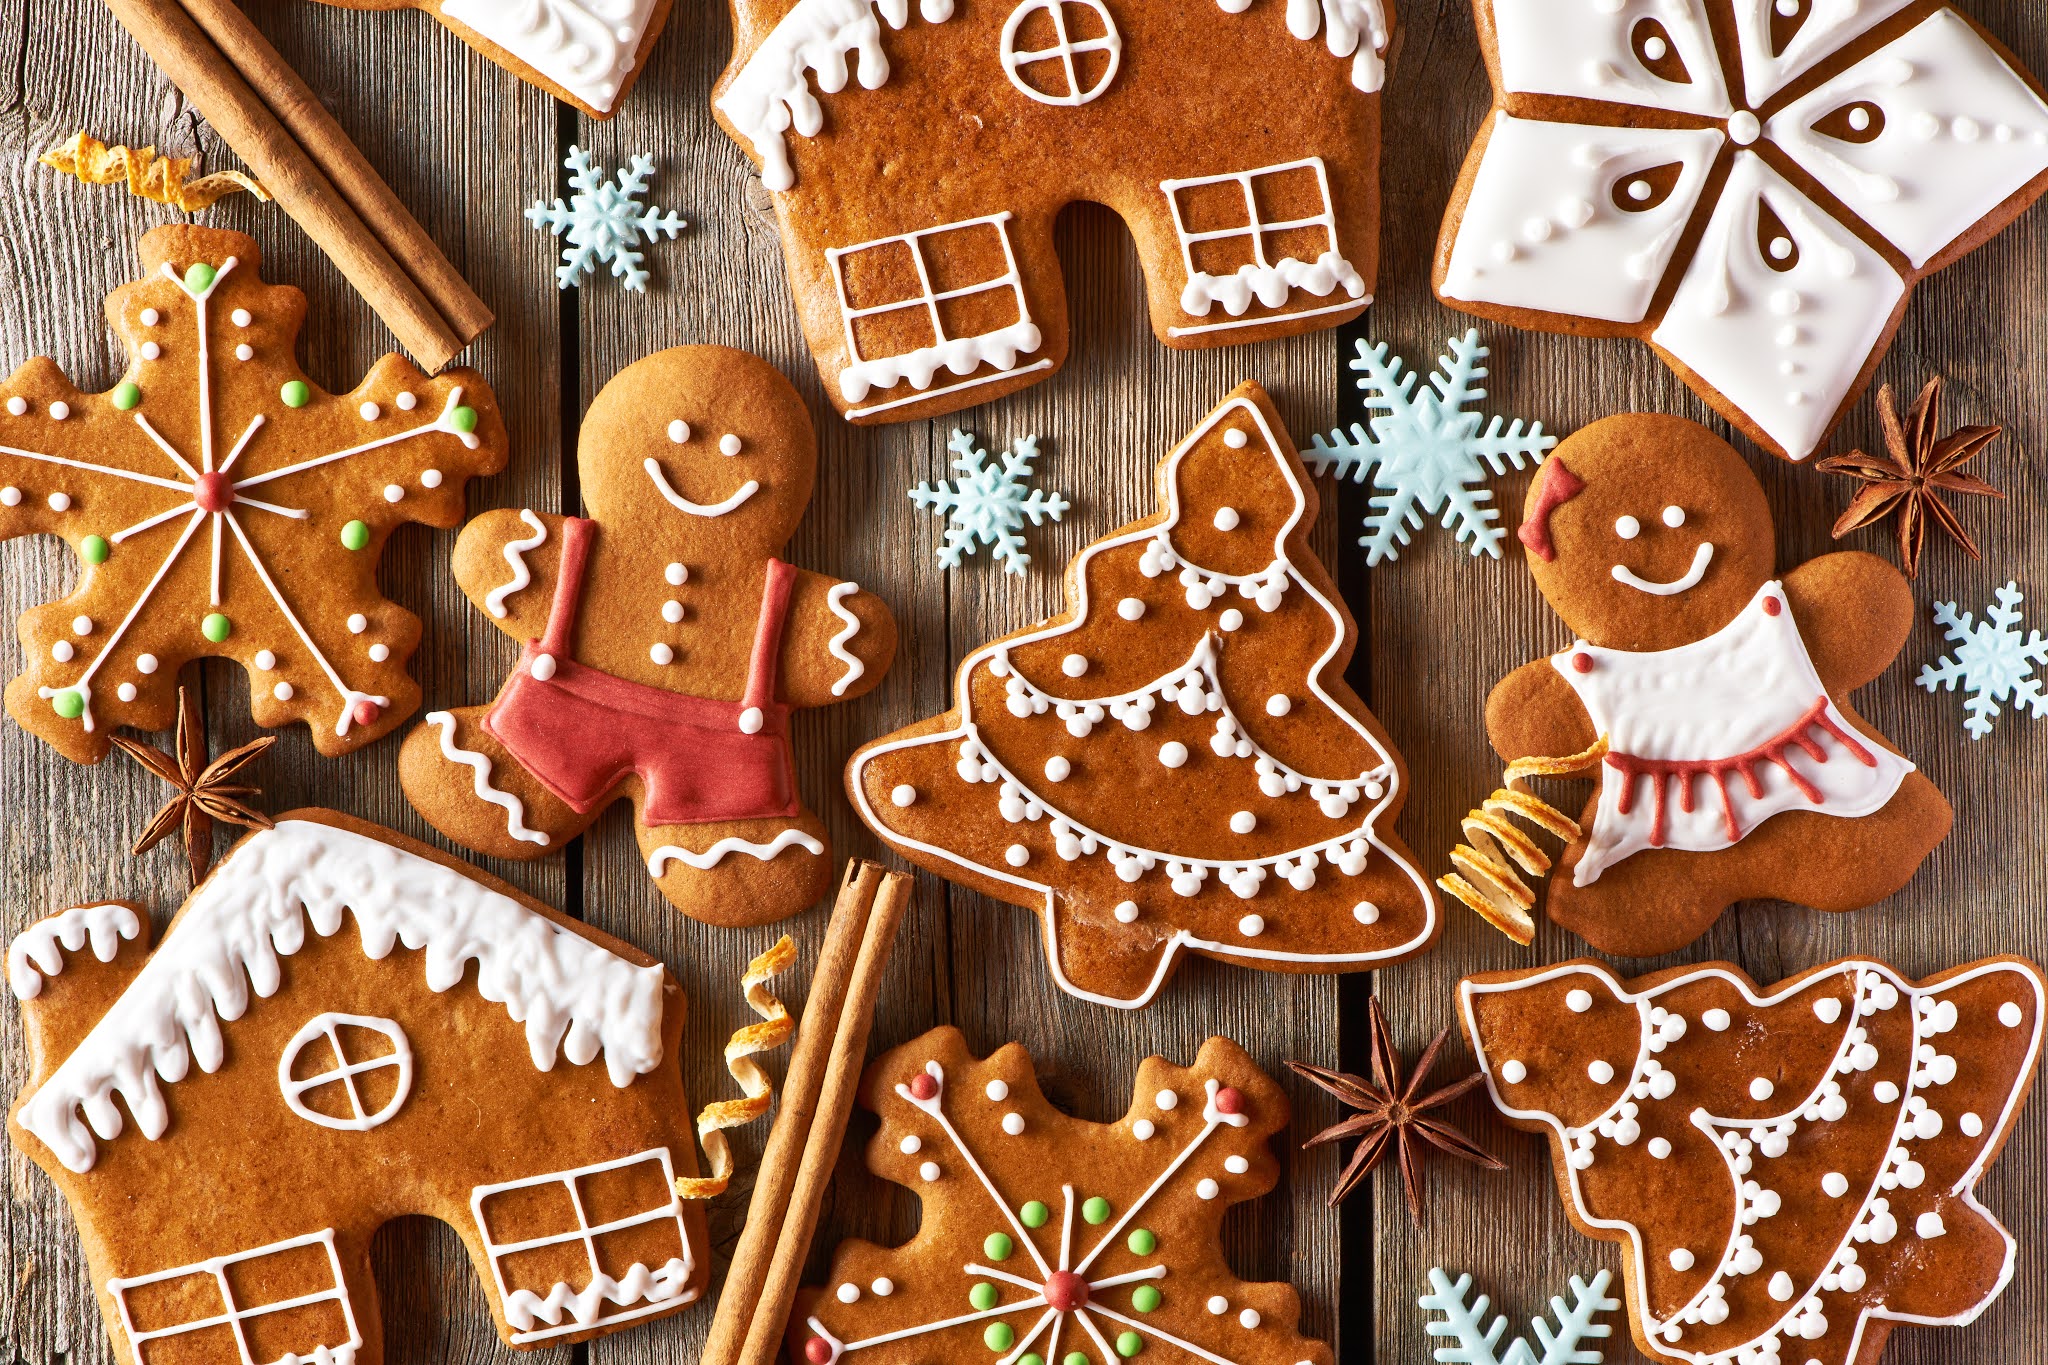 The Most Popular Christmas Treats on Instagram